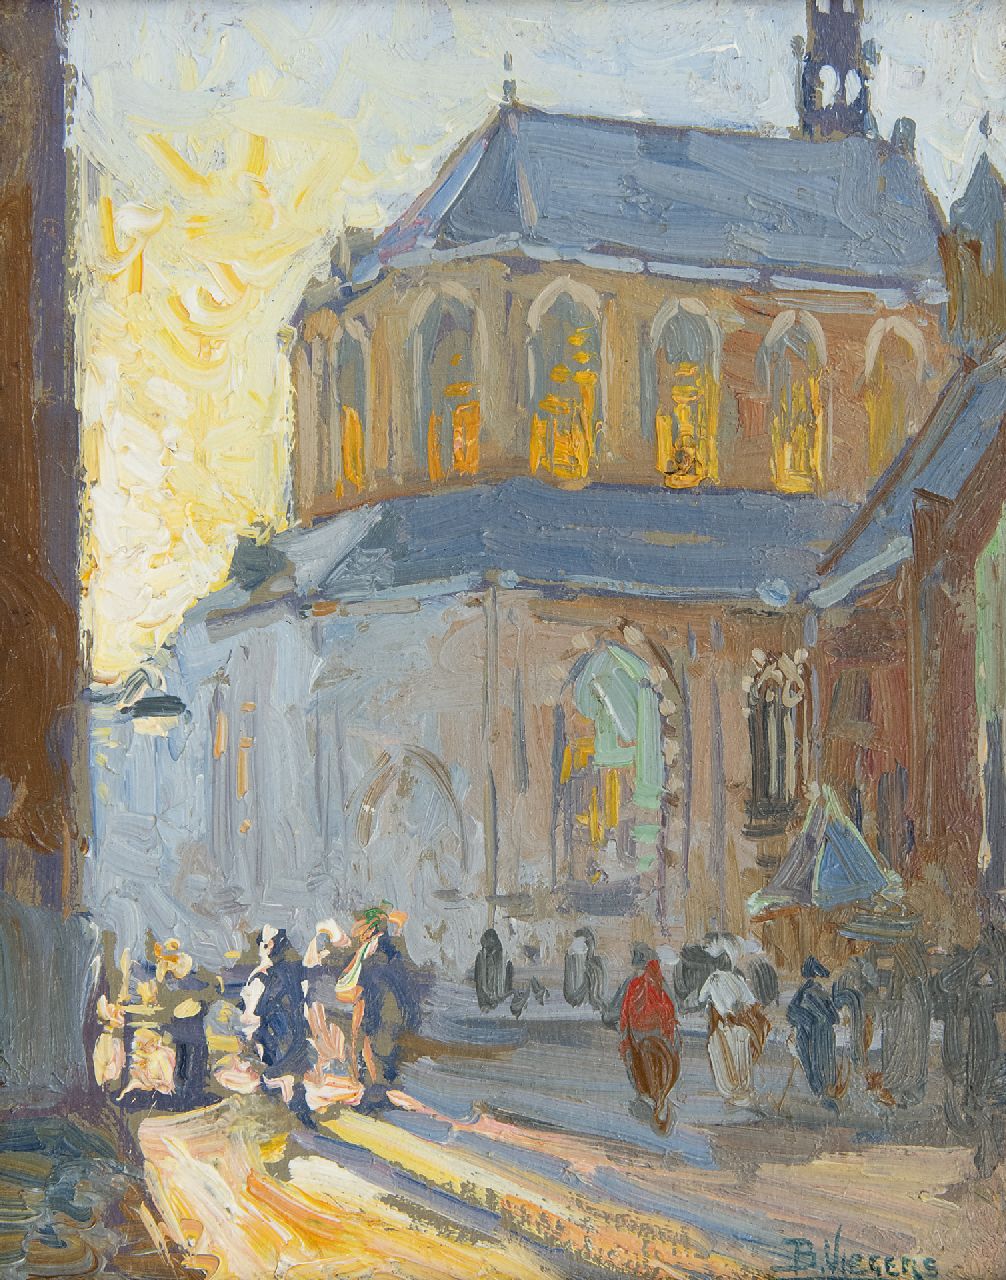 Viegers B.P.  | Bernardus Petrus 'Ben' Viegers | Paintings offered for sale | Behind the Grote Kerk, Den Haag, oil on paper laid down on panel 18.2 x 14.5 cm, signed l.r.